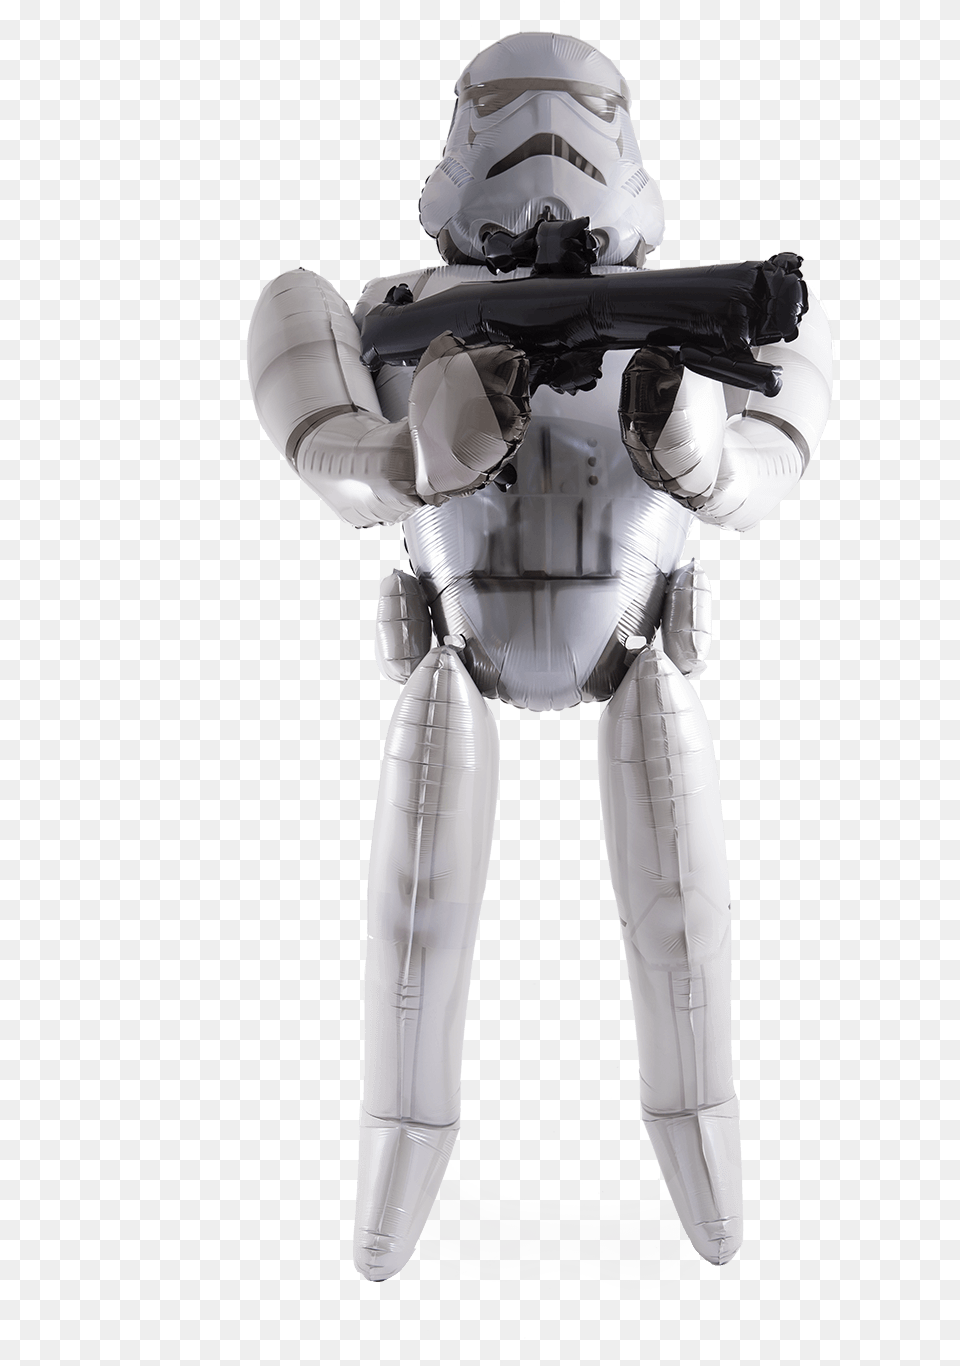 Stormtrooper Air Walker Figurine, Person, Robot, Mortar Shell, Weapon Free Transparent Png